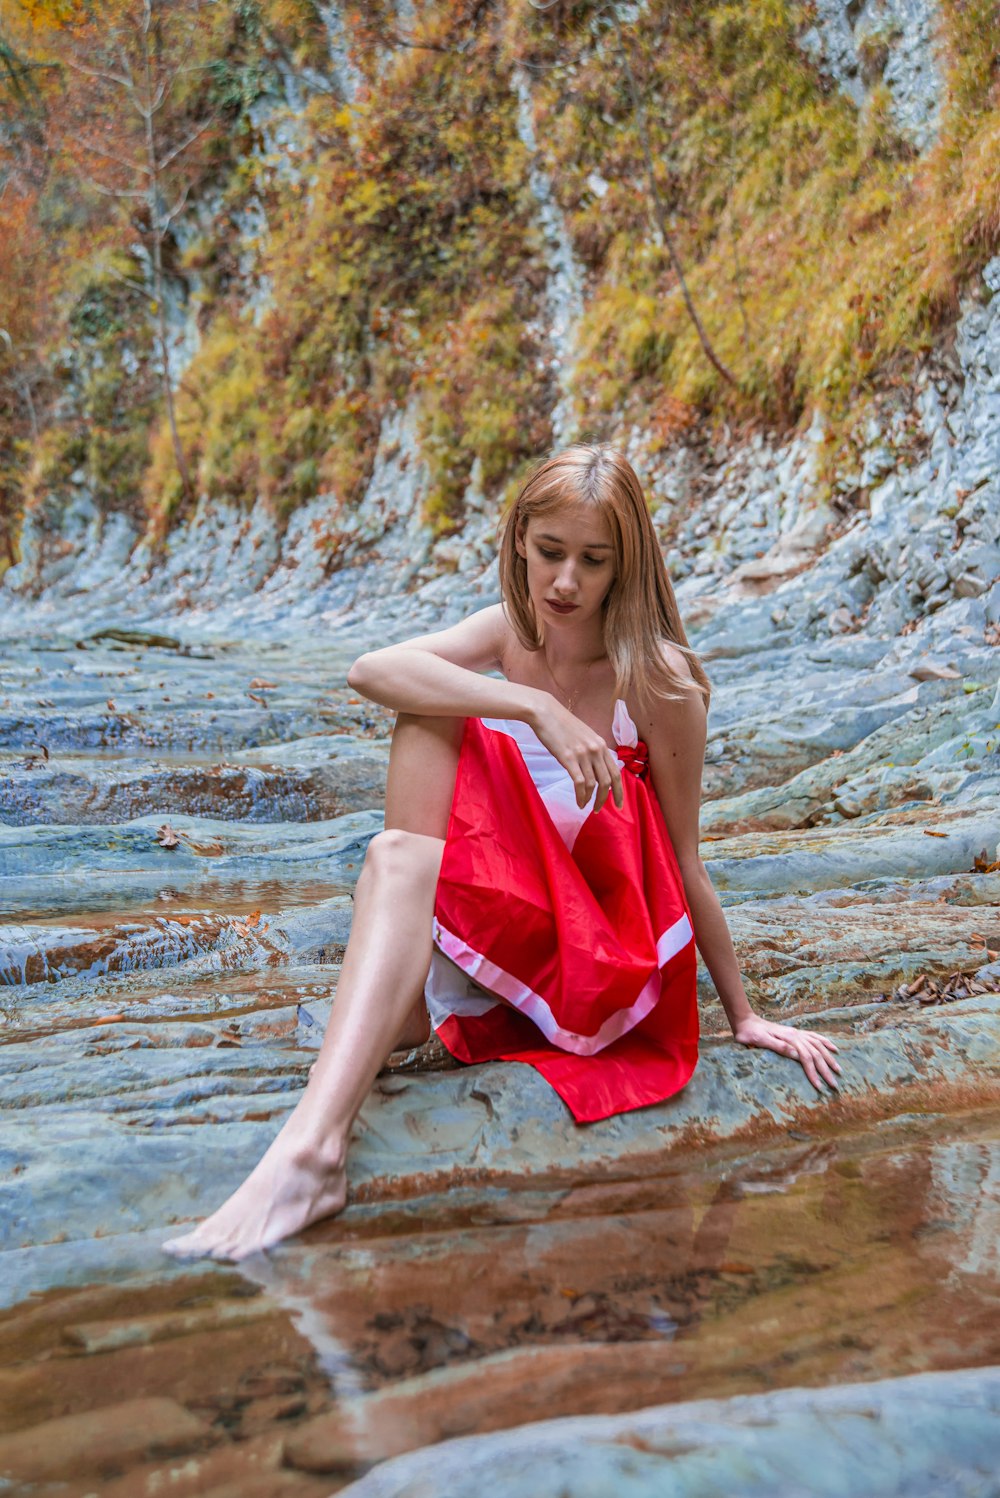 woman in white and red dress sitting on rocks